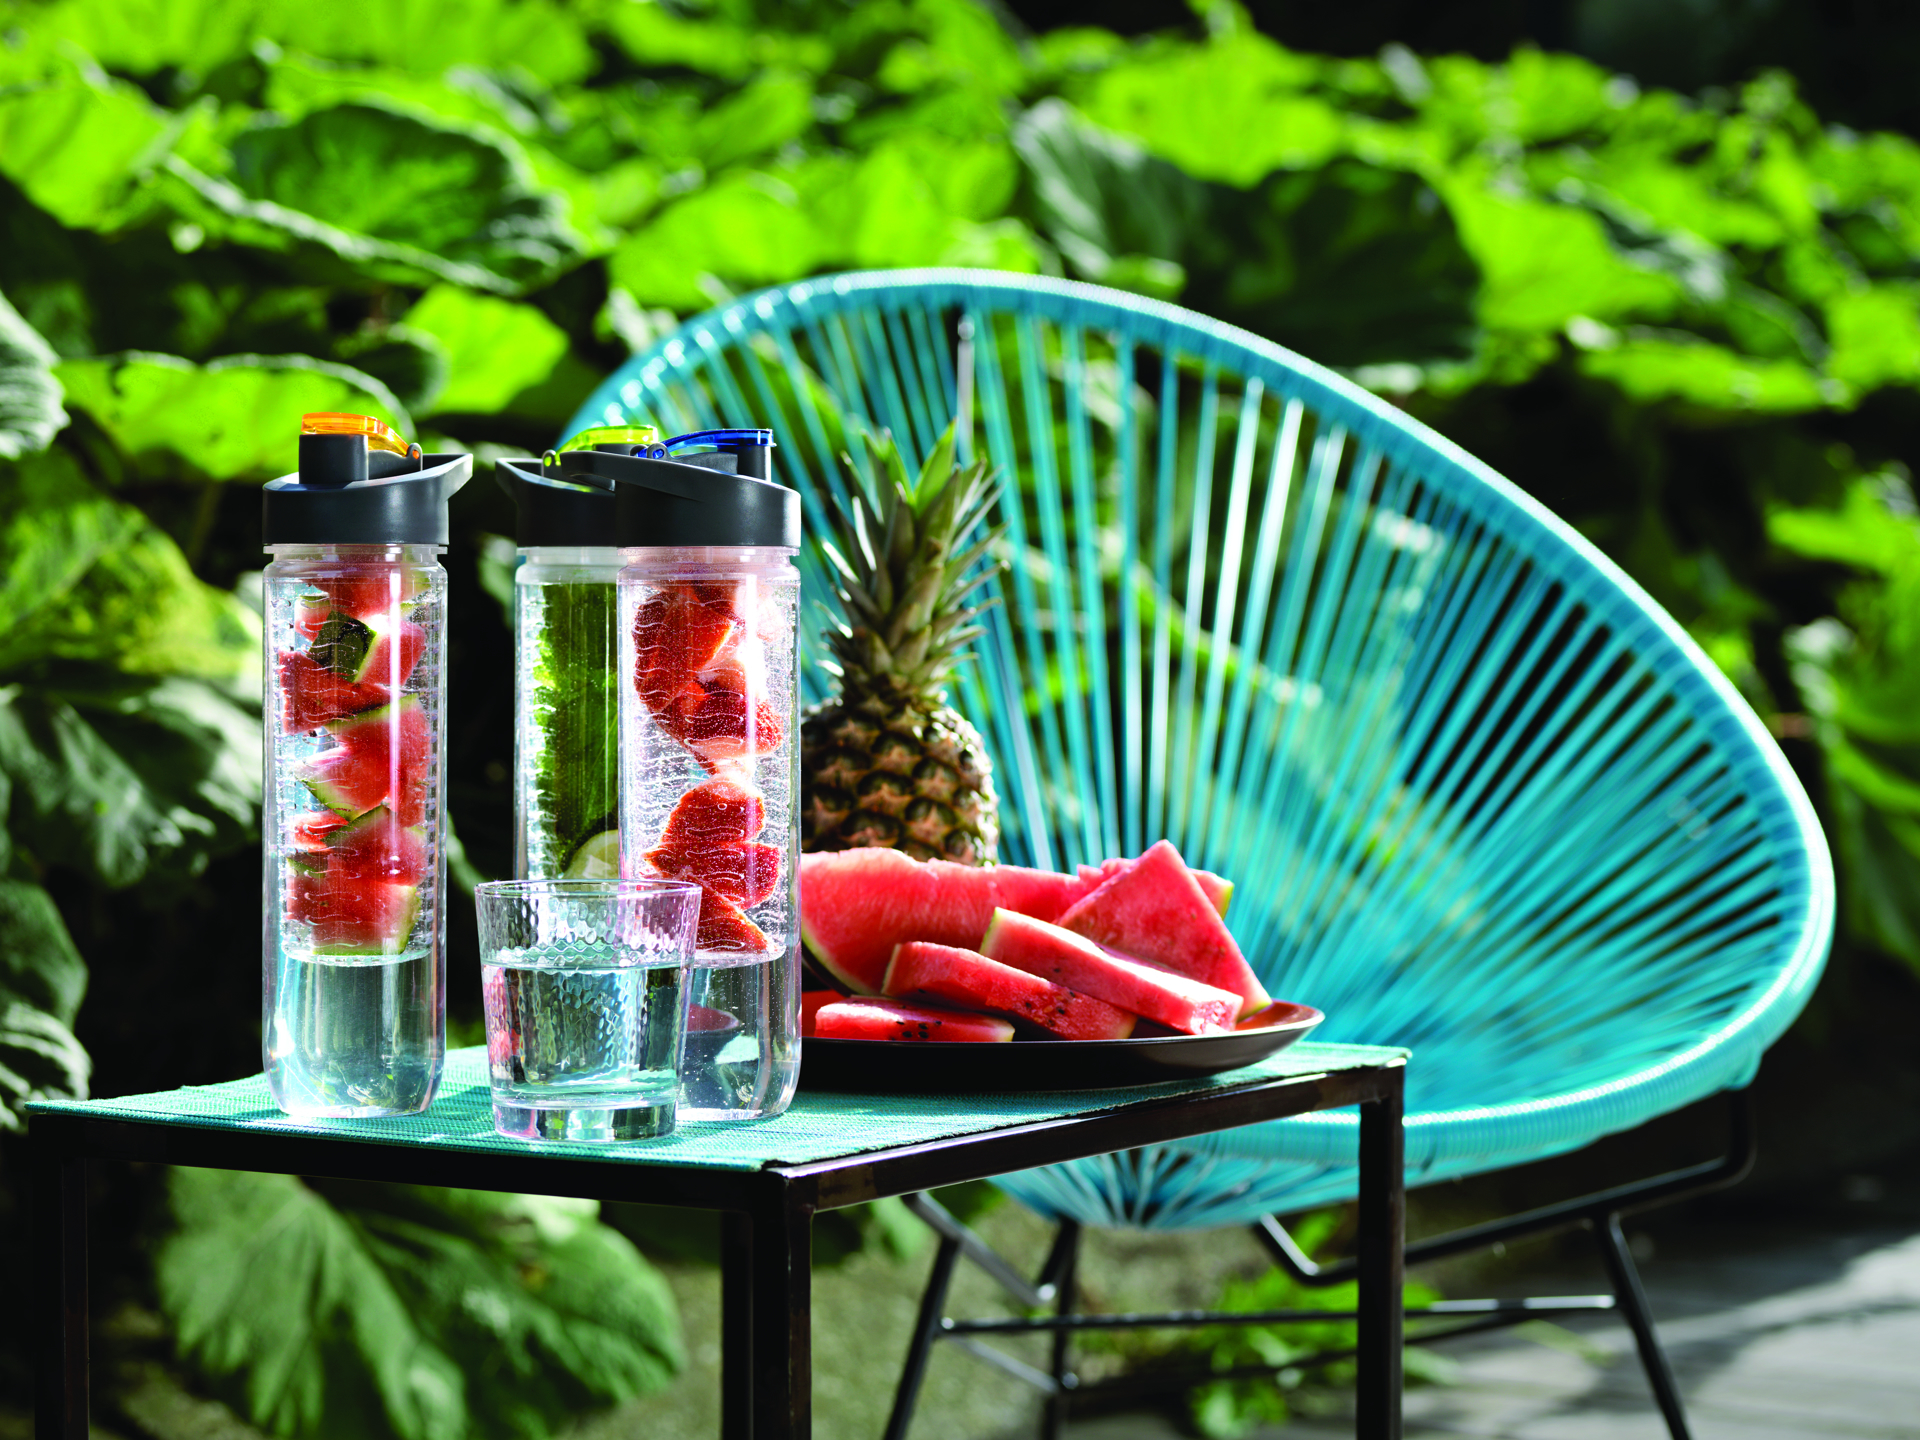 outdoor scene of water bottles with fruit infusers and black lids